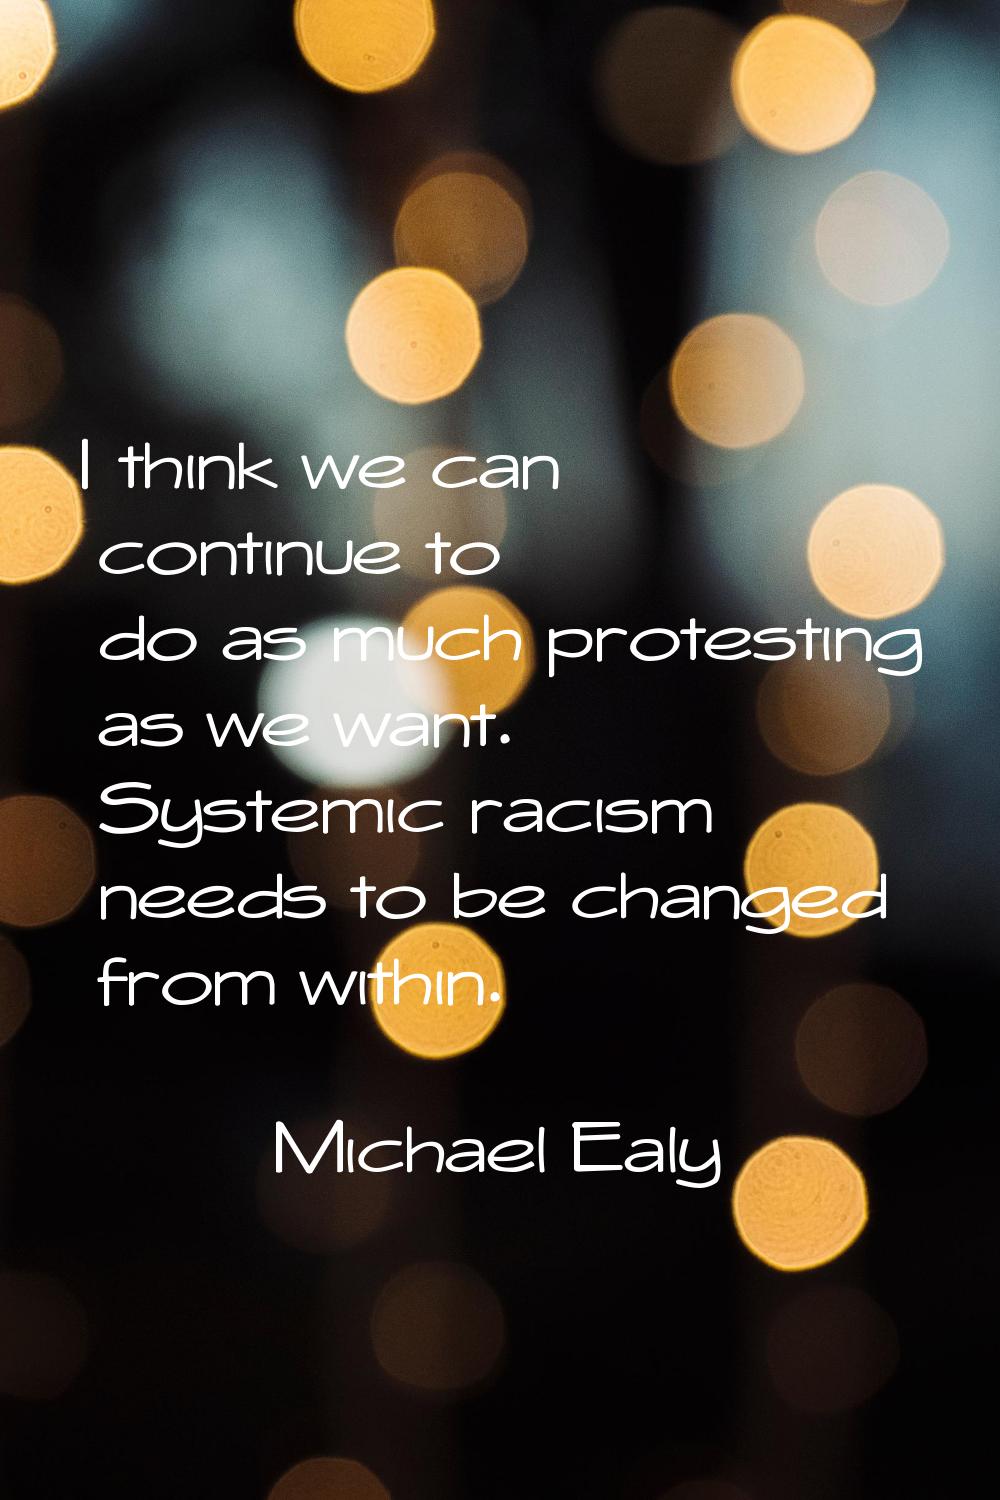 I think we can continue to do as much protesting as we want. Systemic racism needs to be changed fr